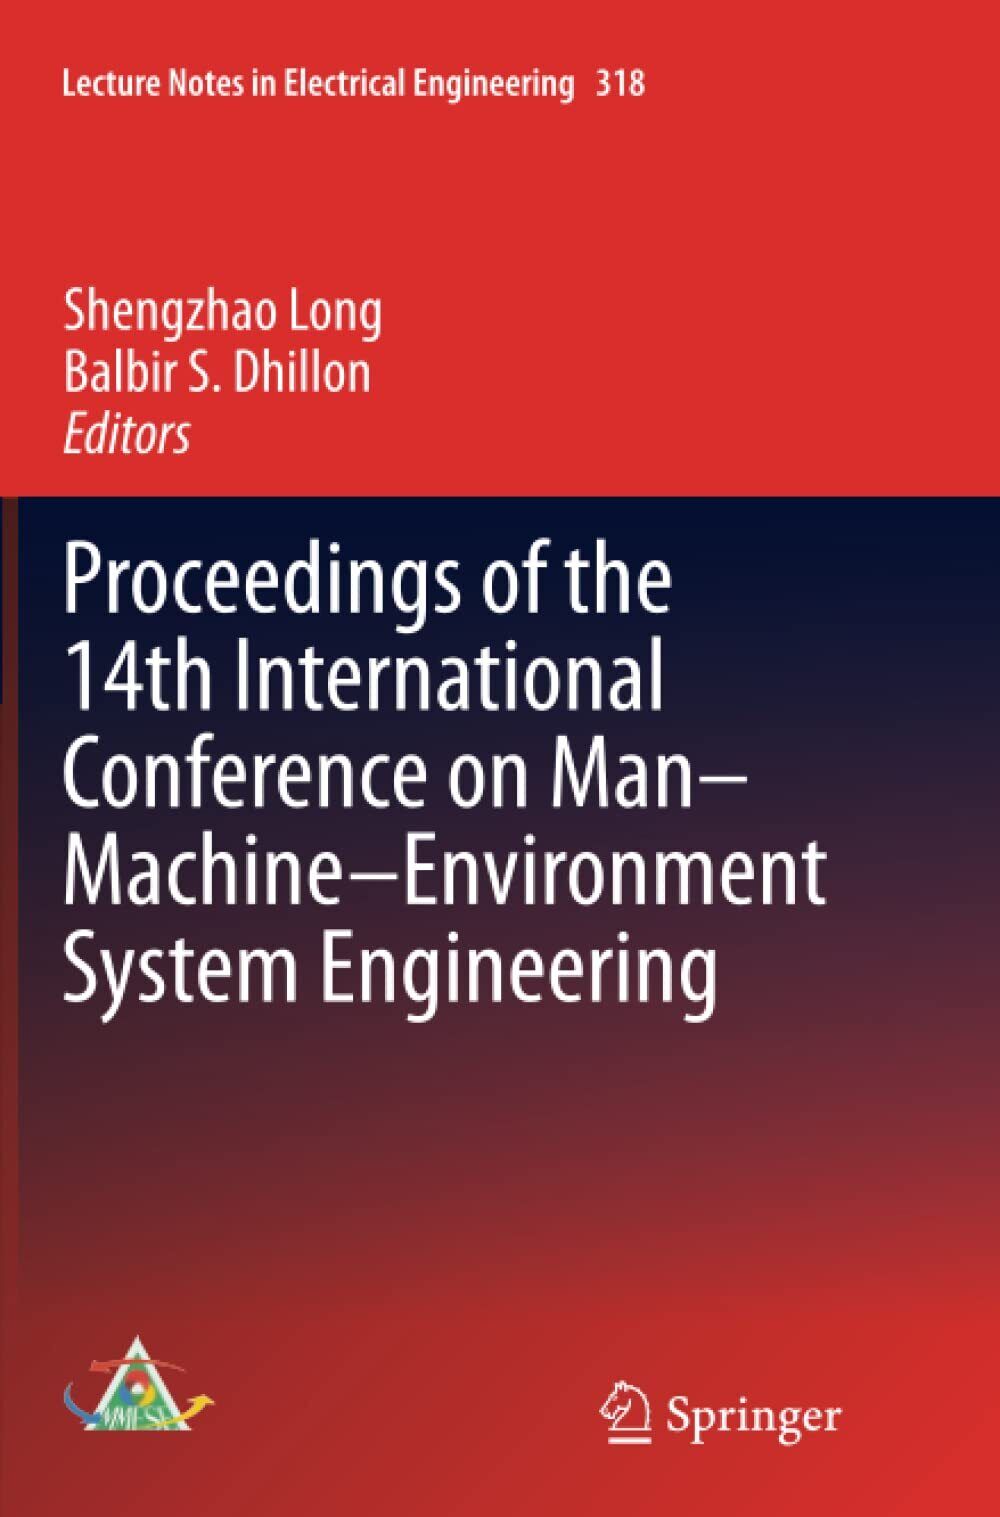 Proceedings of the 14th International Conference on Man-Machine-Environment Syst